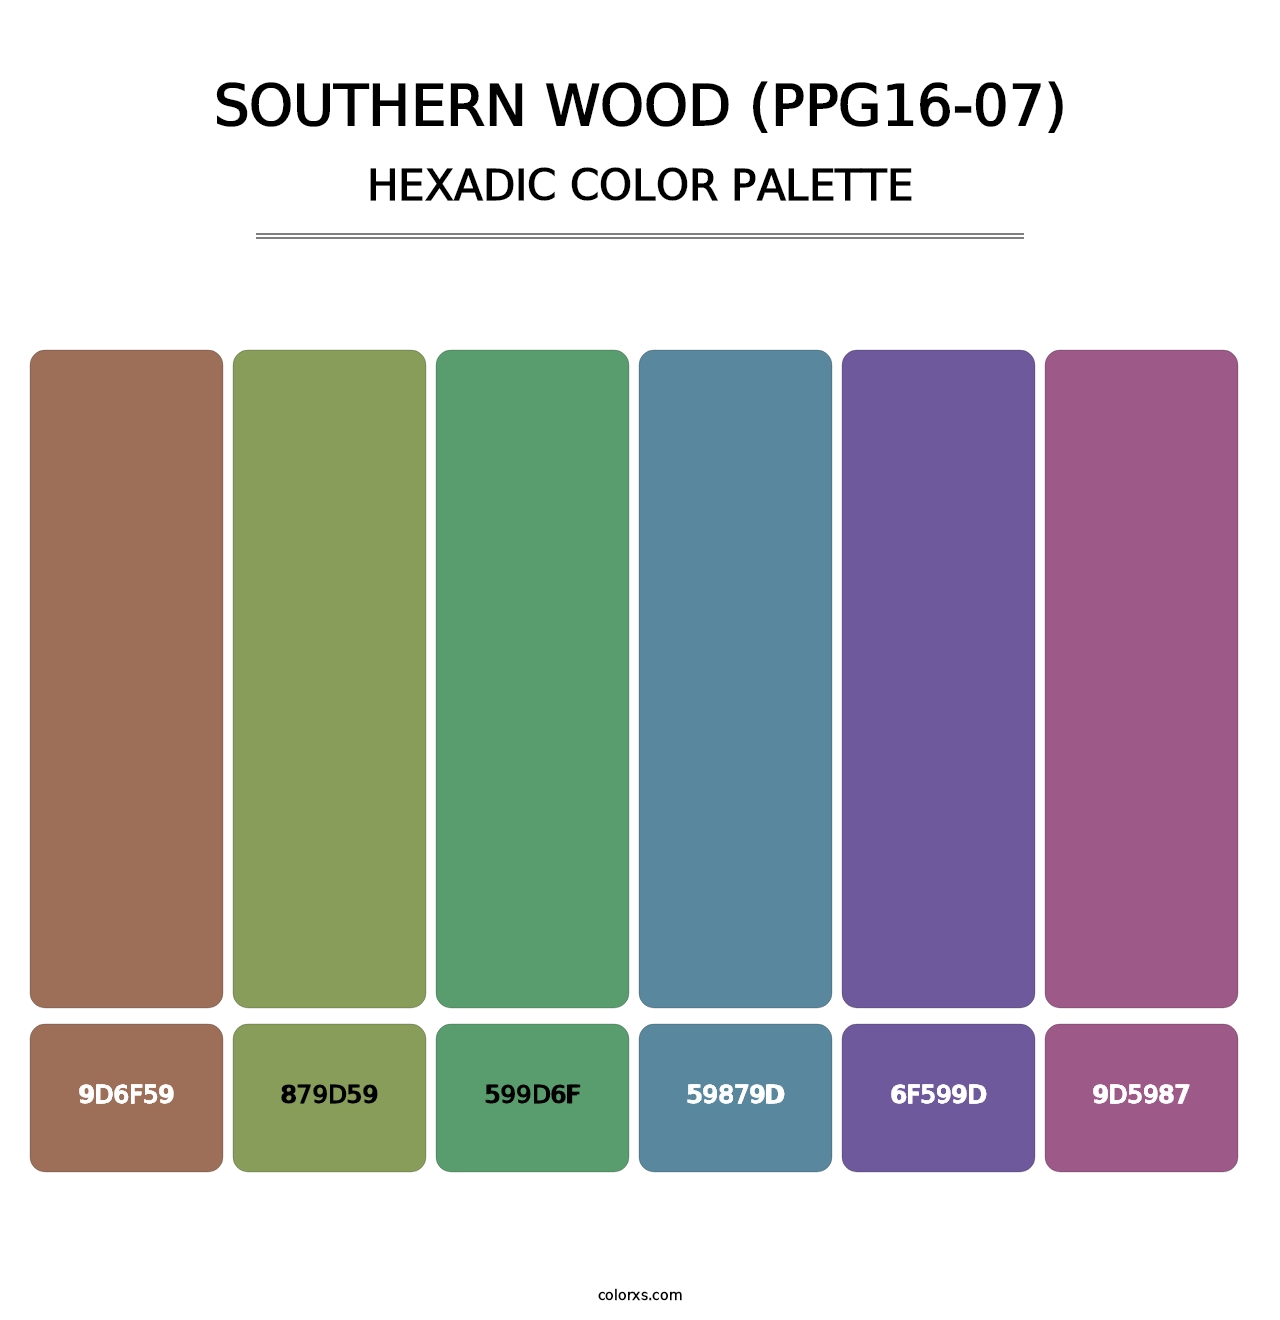 Southern Wood (PPG16-07) - Hexadic Color Palette